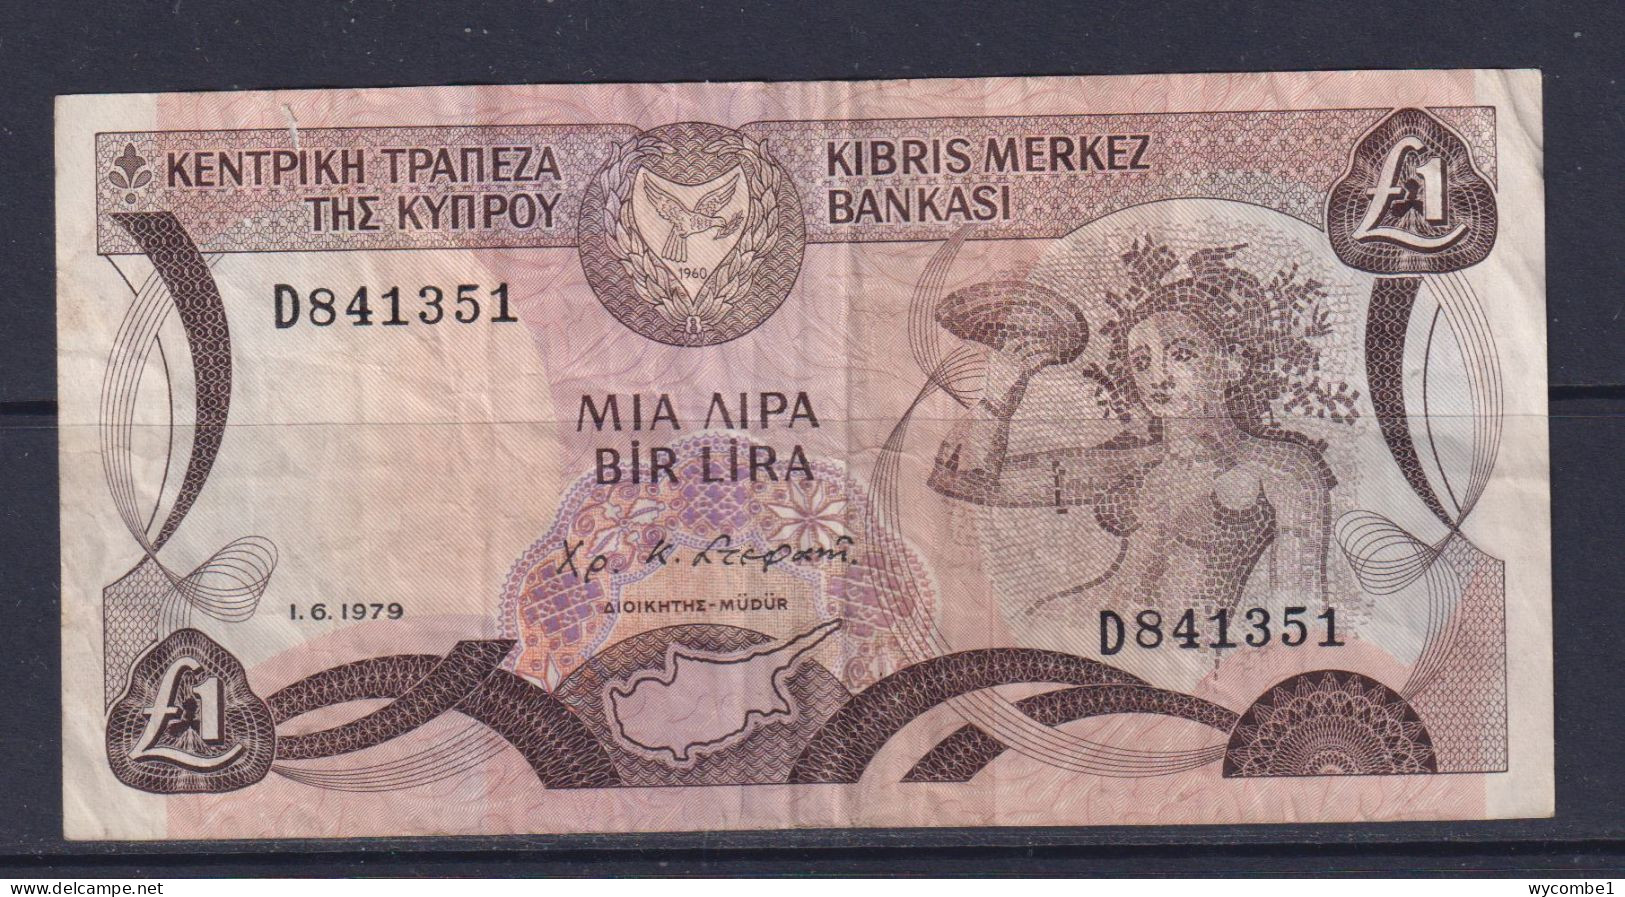 CYPRUS - 1979 1 Pound Circulated Banknote - Cyprus